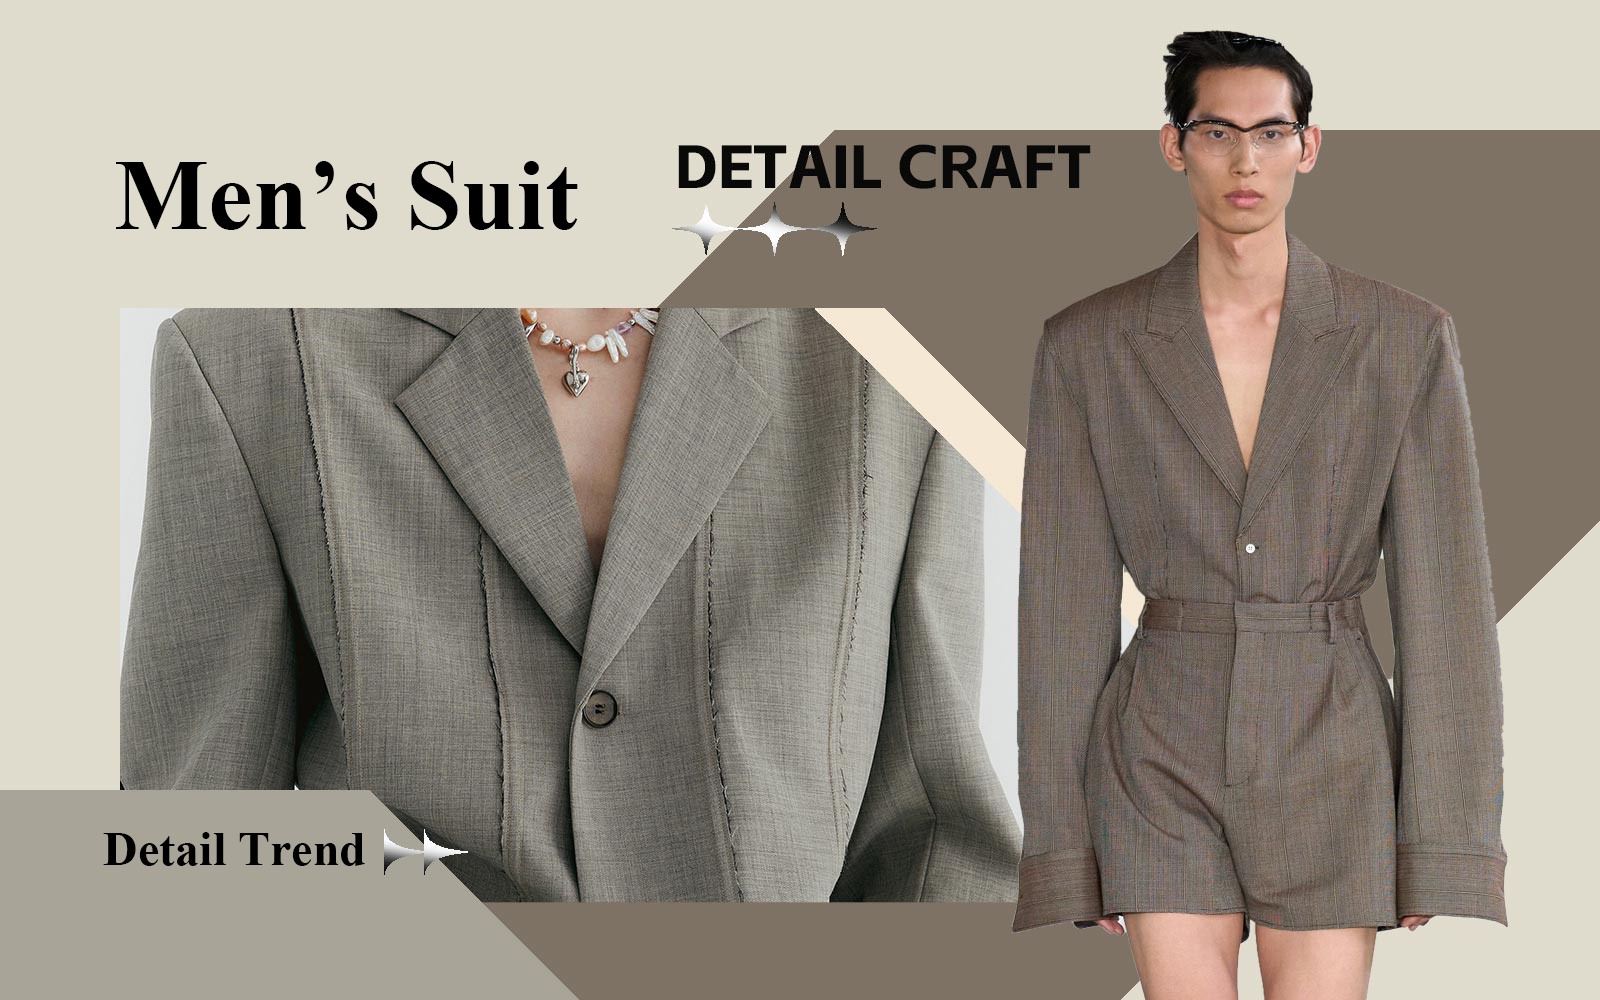 The Detail & Craft Trend for Men's Suit